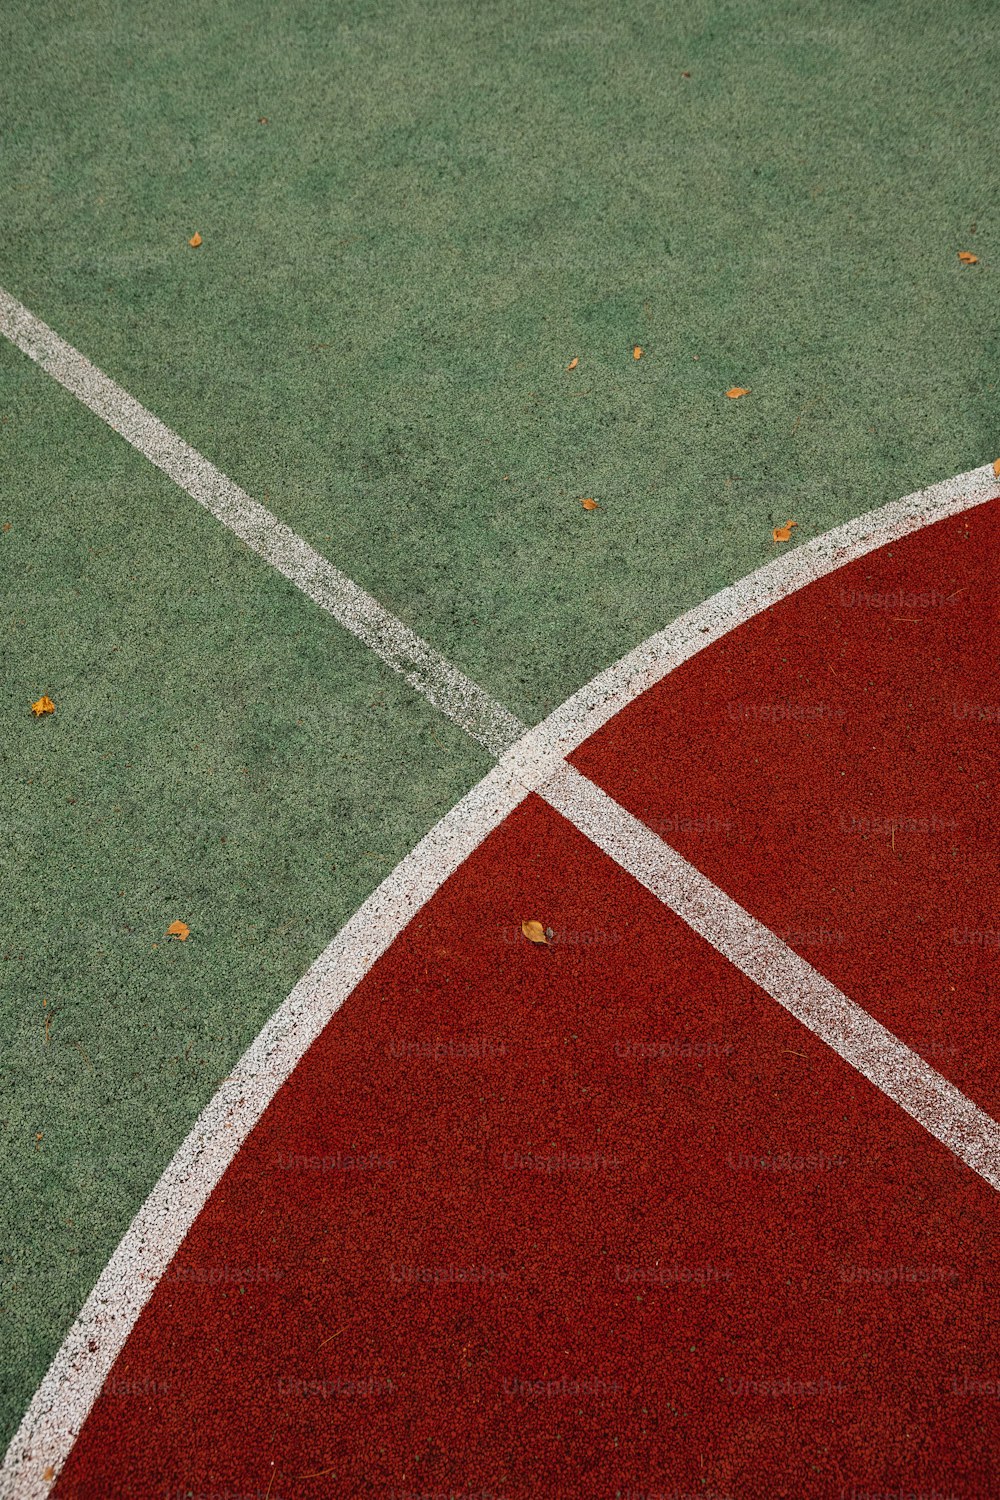 a close up of a tennis court with a tennis racket